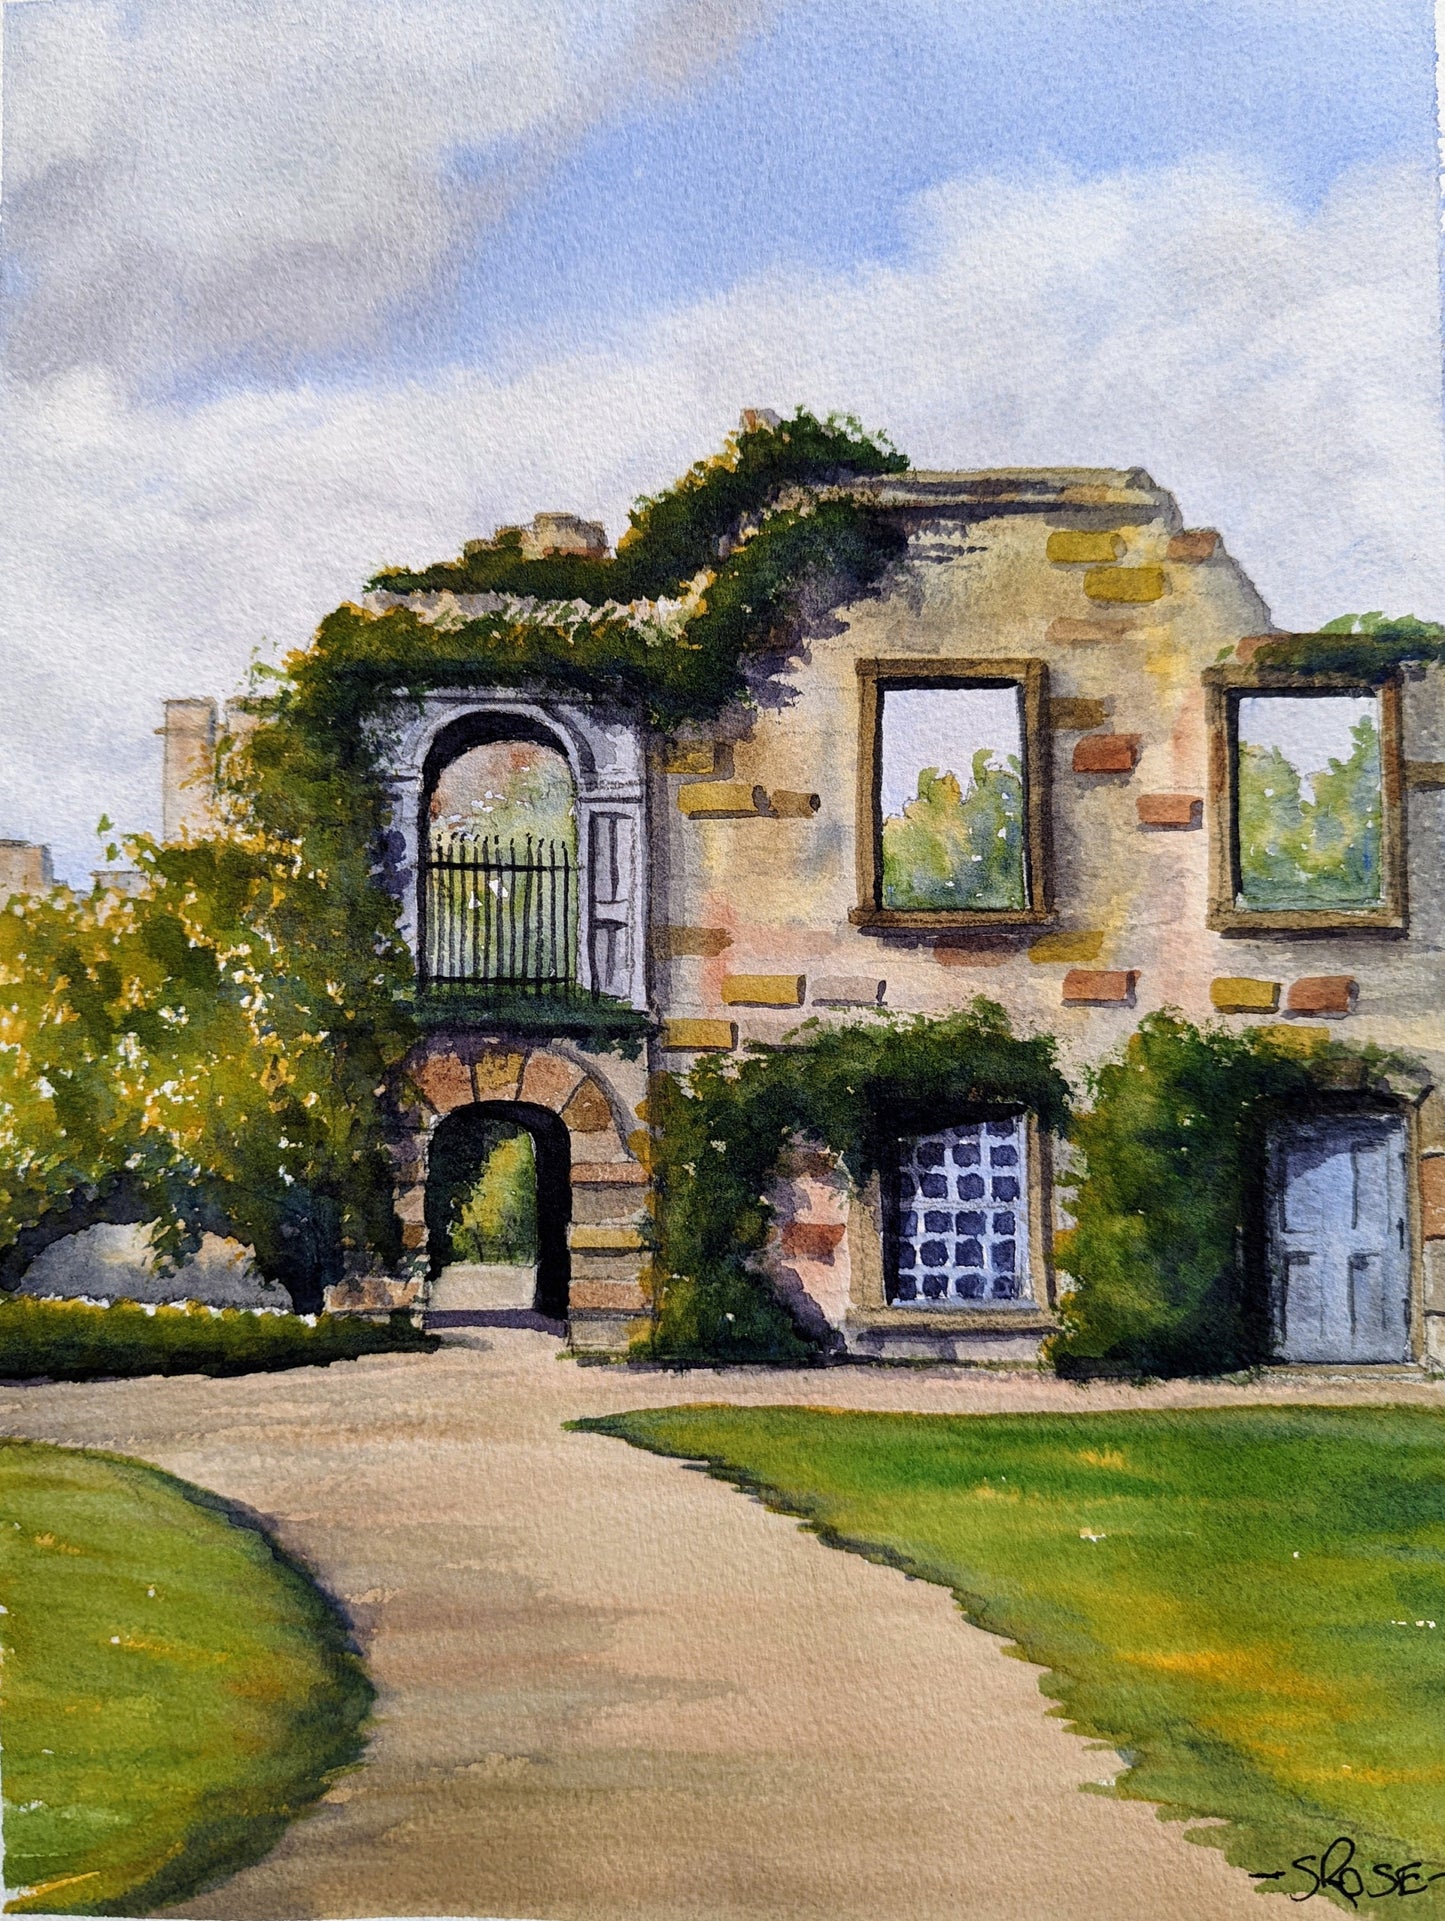 Ruins at Scotney Castle, England (watercolor)